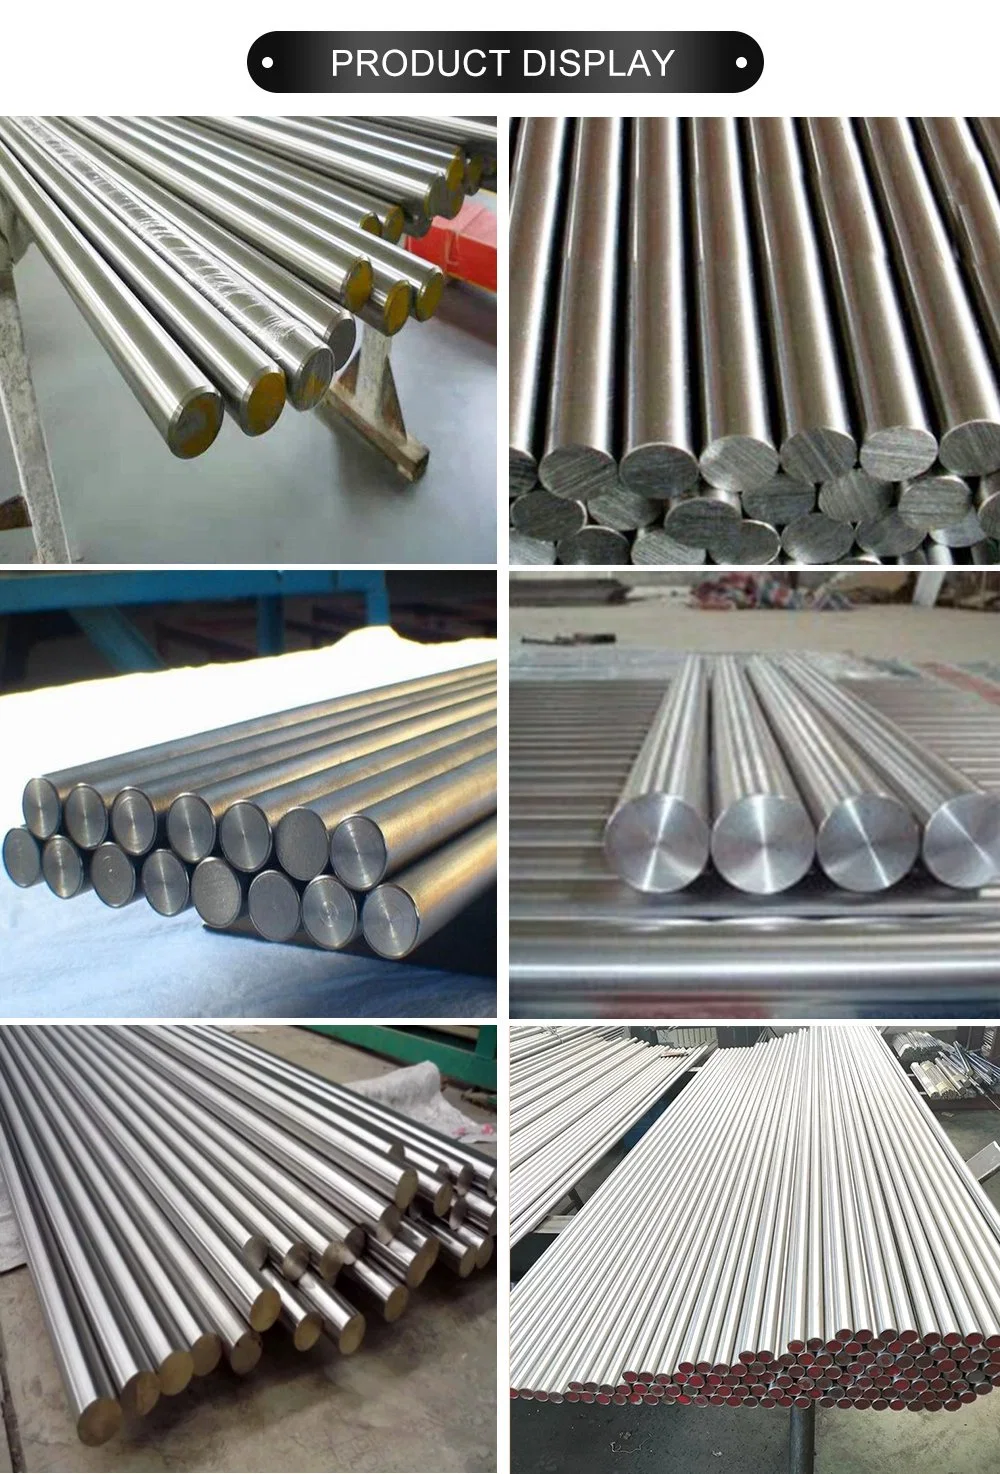 Round/Square/Hexagonal/Angle/Flat/Channel 304 316 316 321 410 420 Steel Rod, Bright or Black Stainless /Copper/Aluminum/Carbon Steel Rod Bar Price